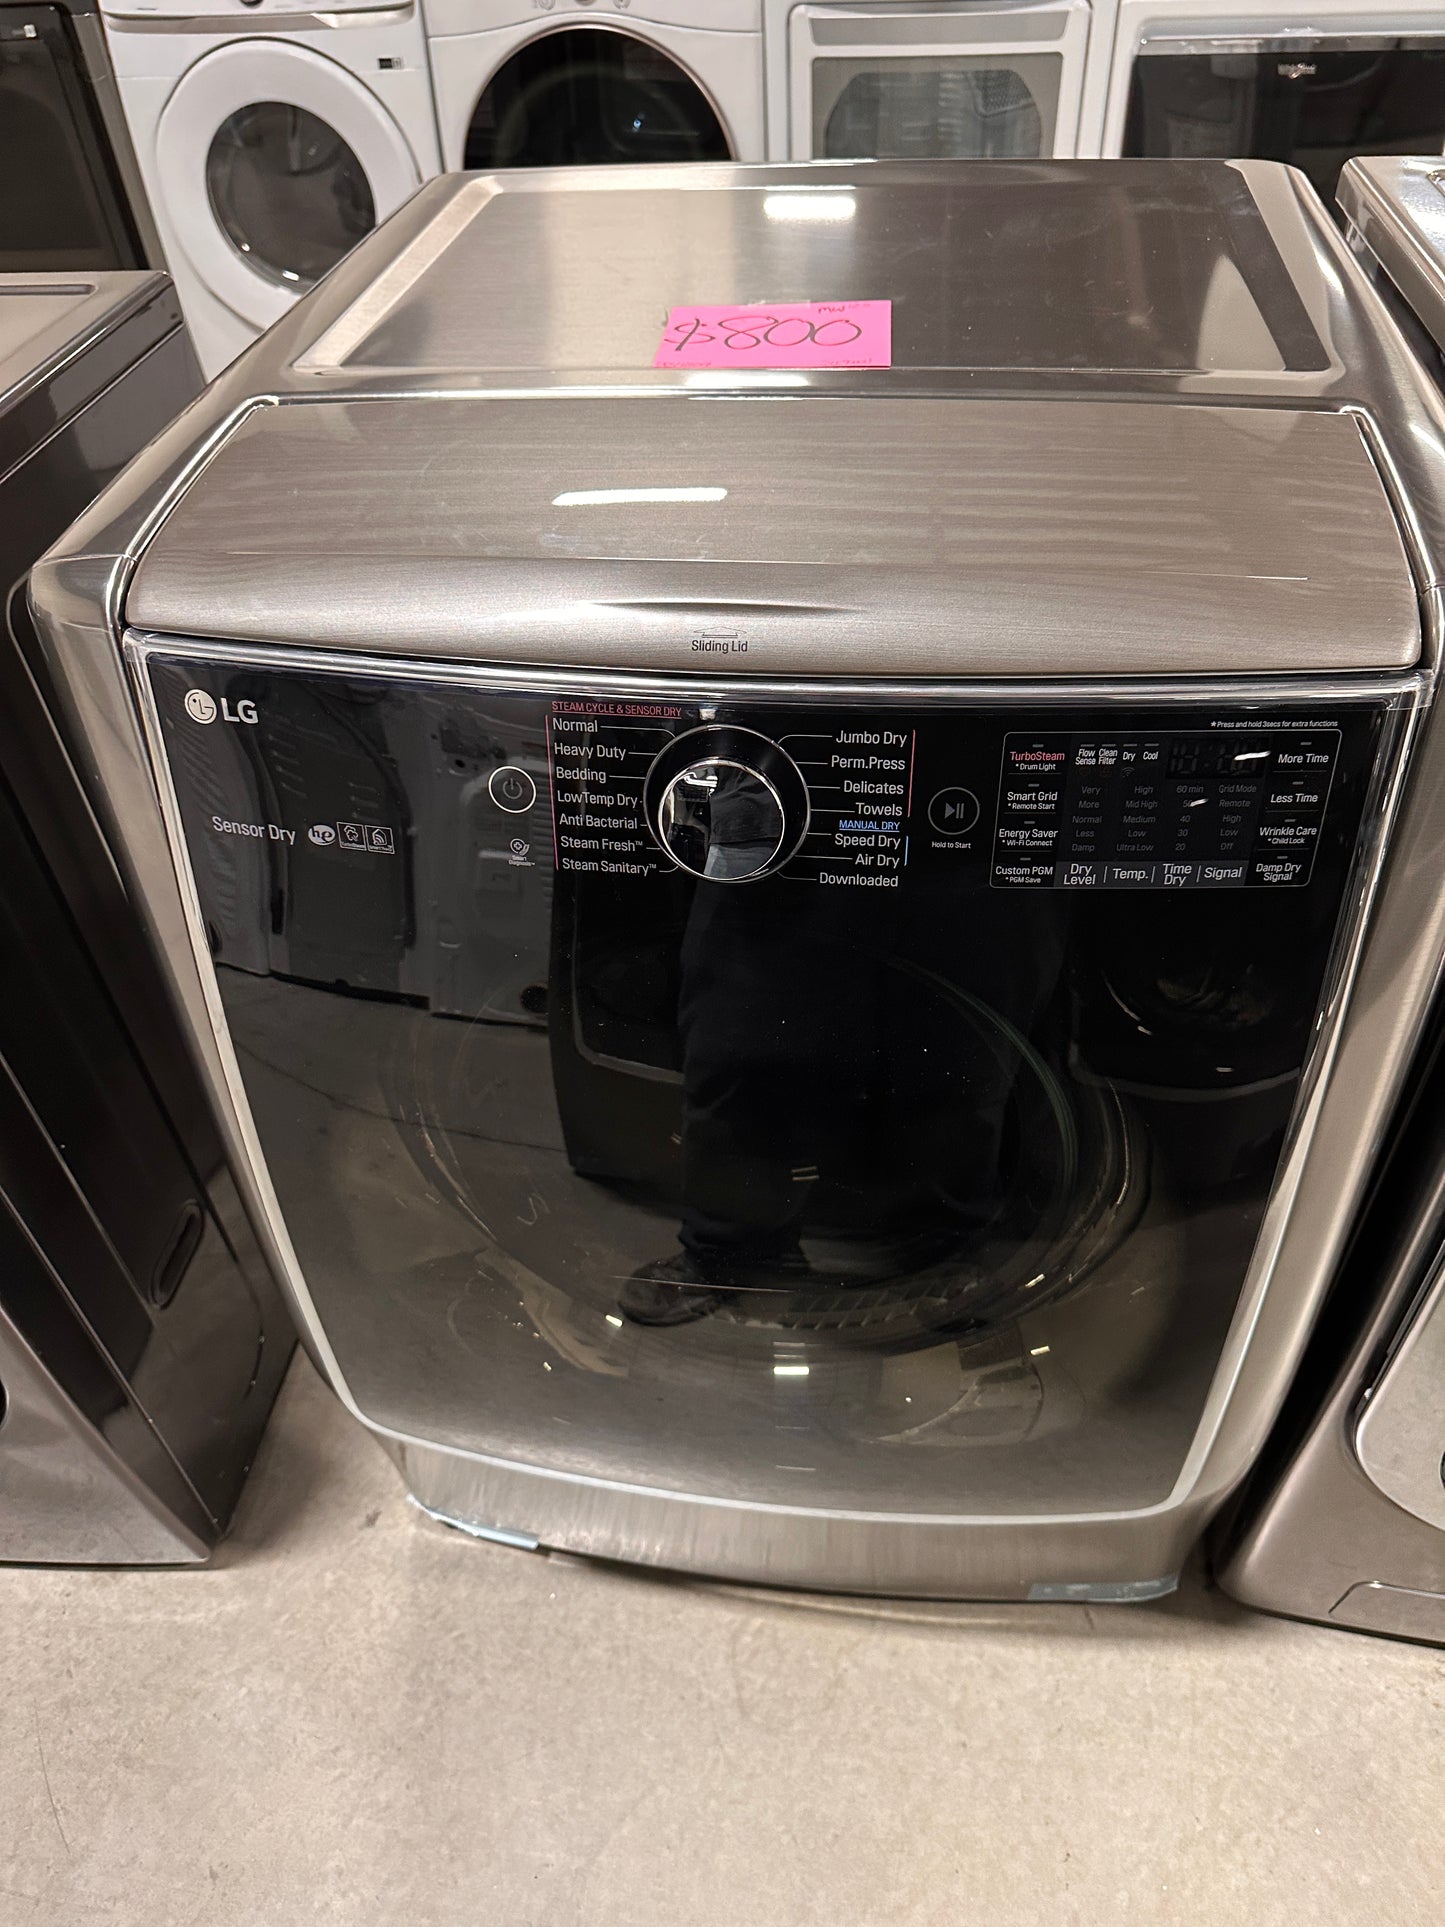 BEAUTIFUL BRAND NEW ELECTRIC DRYER IN BOX - DRY12096